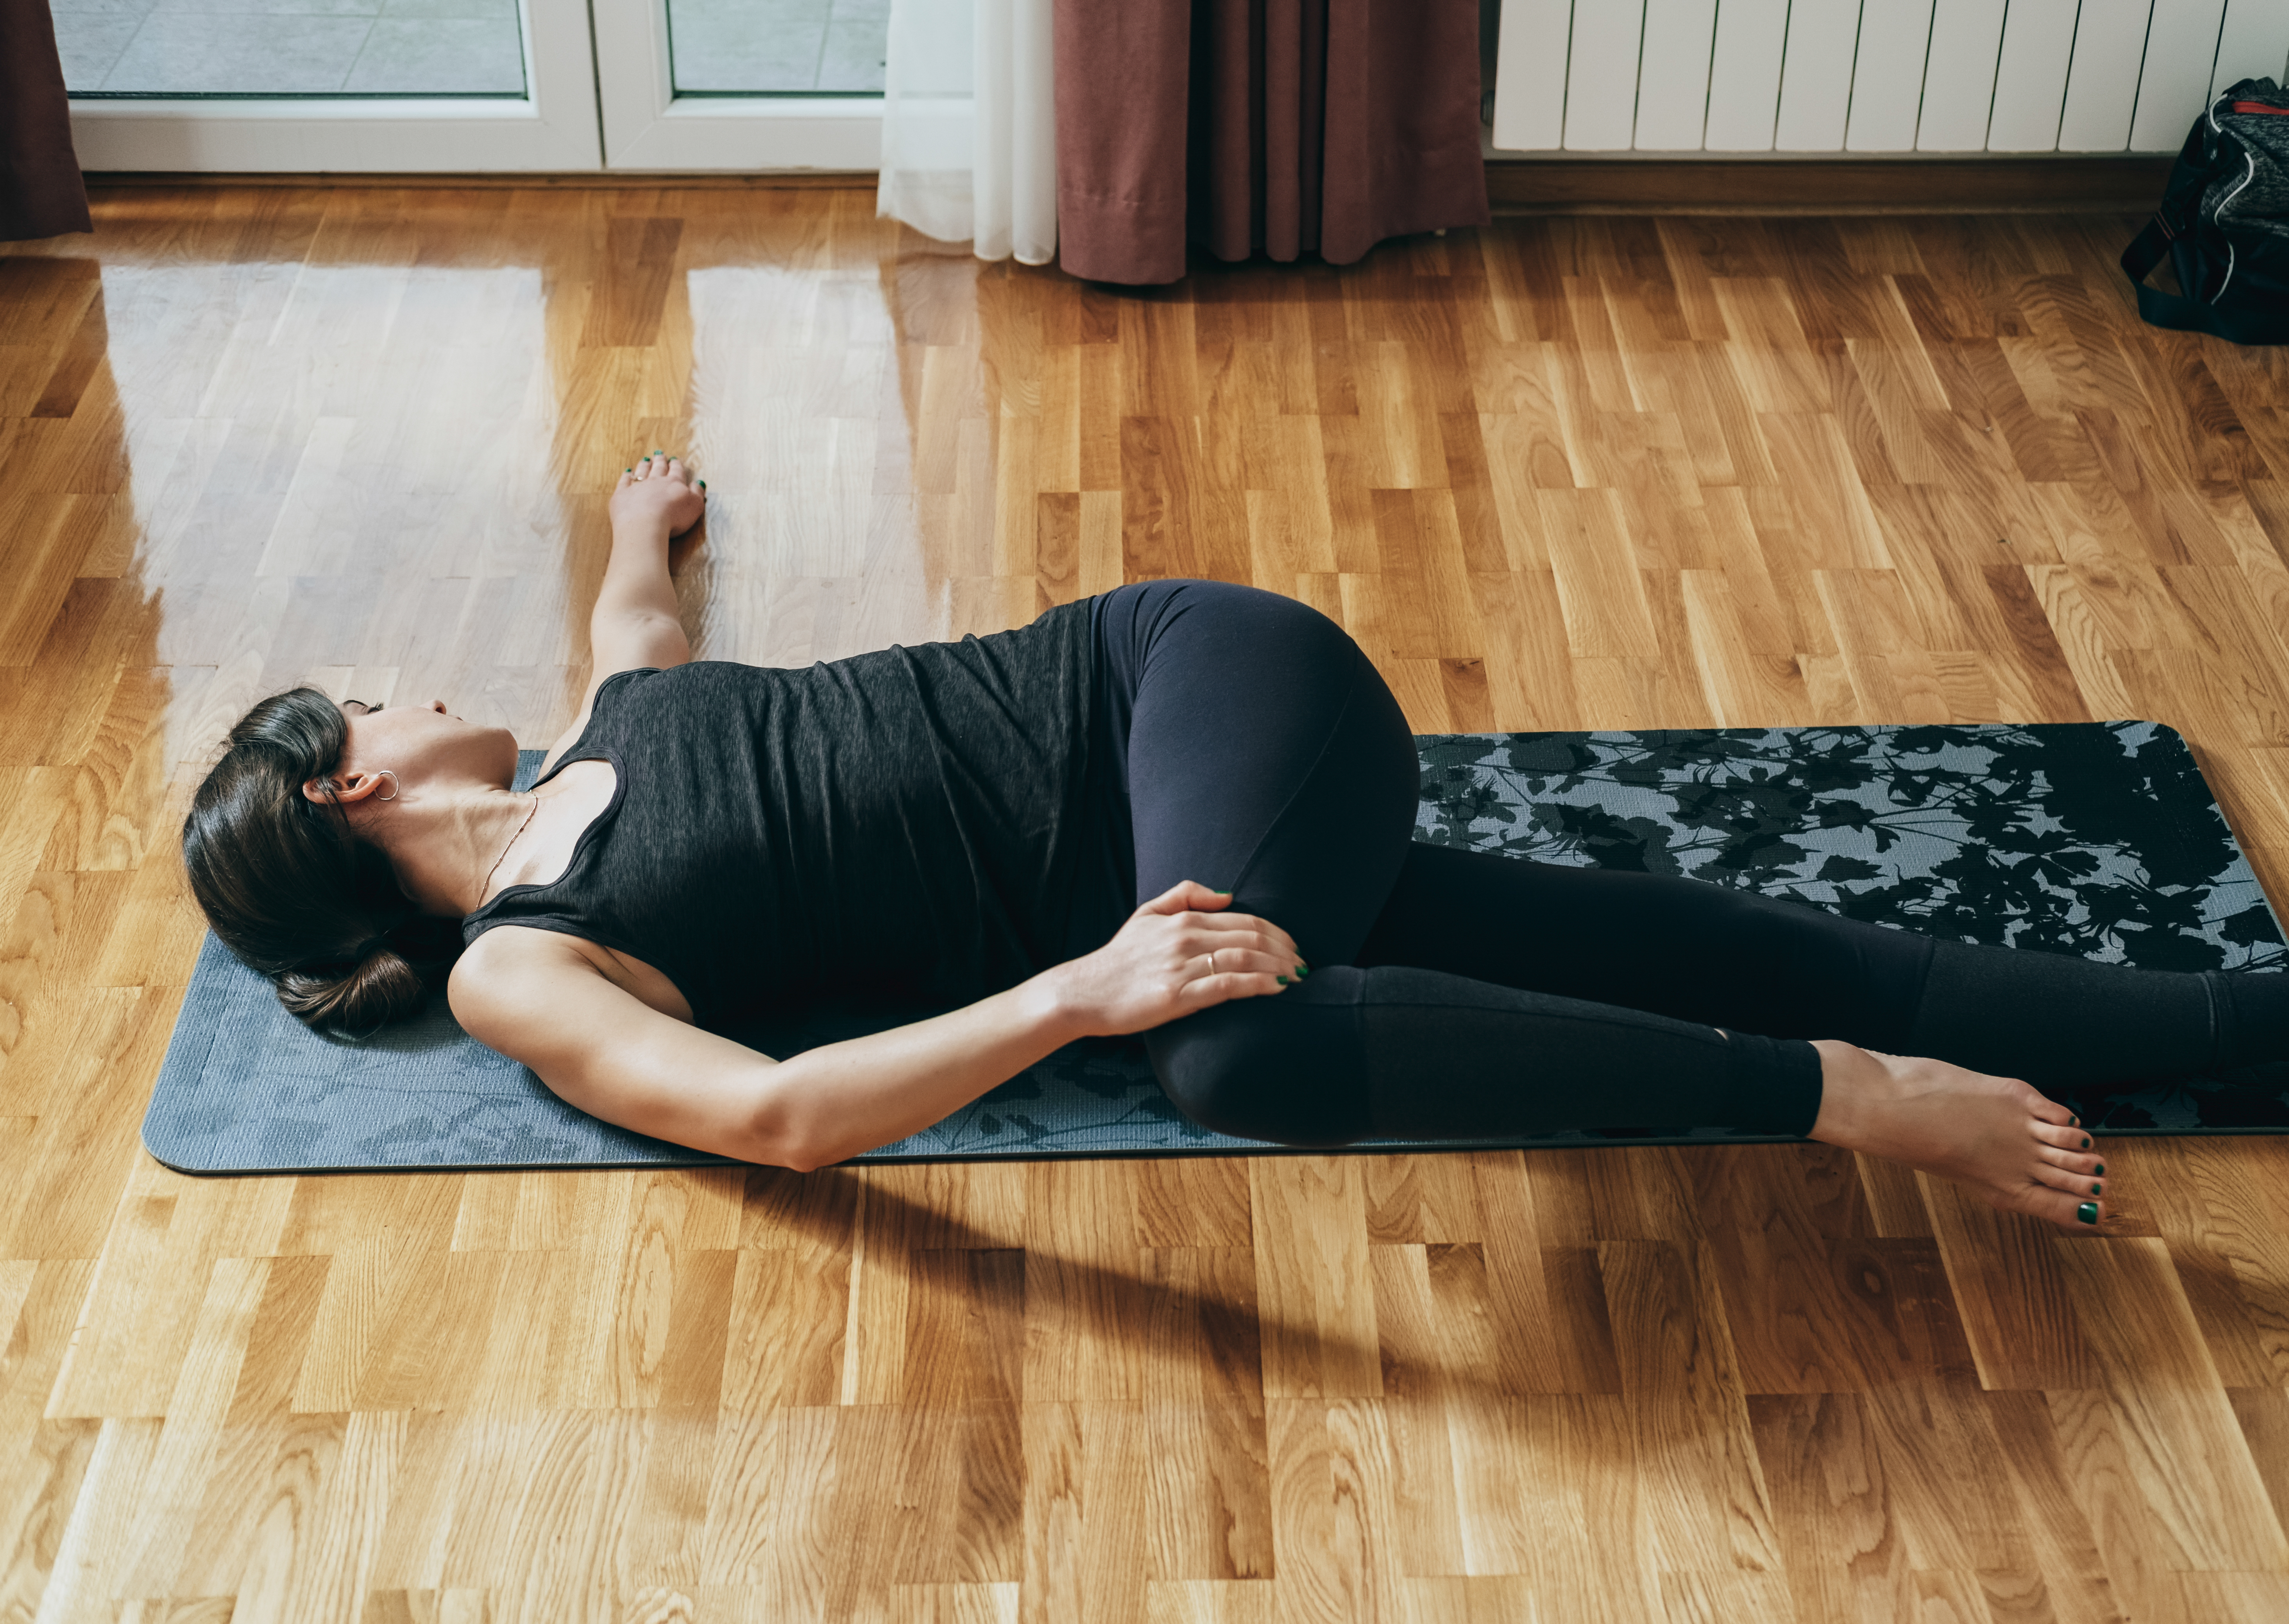 Restorative Yoga With One Bolster - 5 Relaxing Poses 